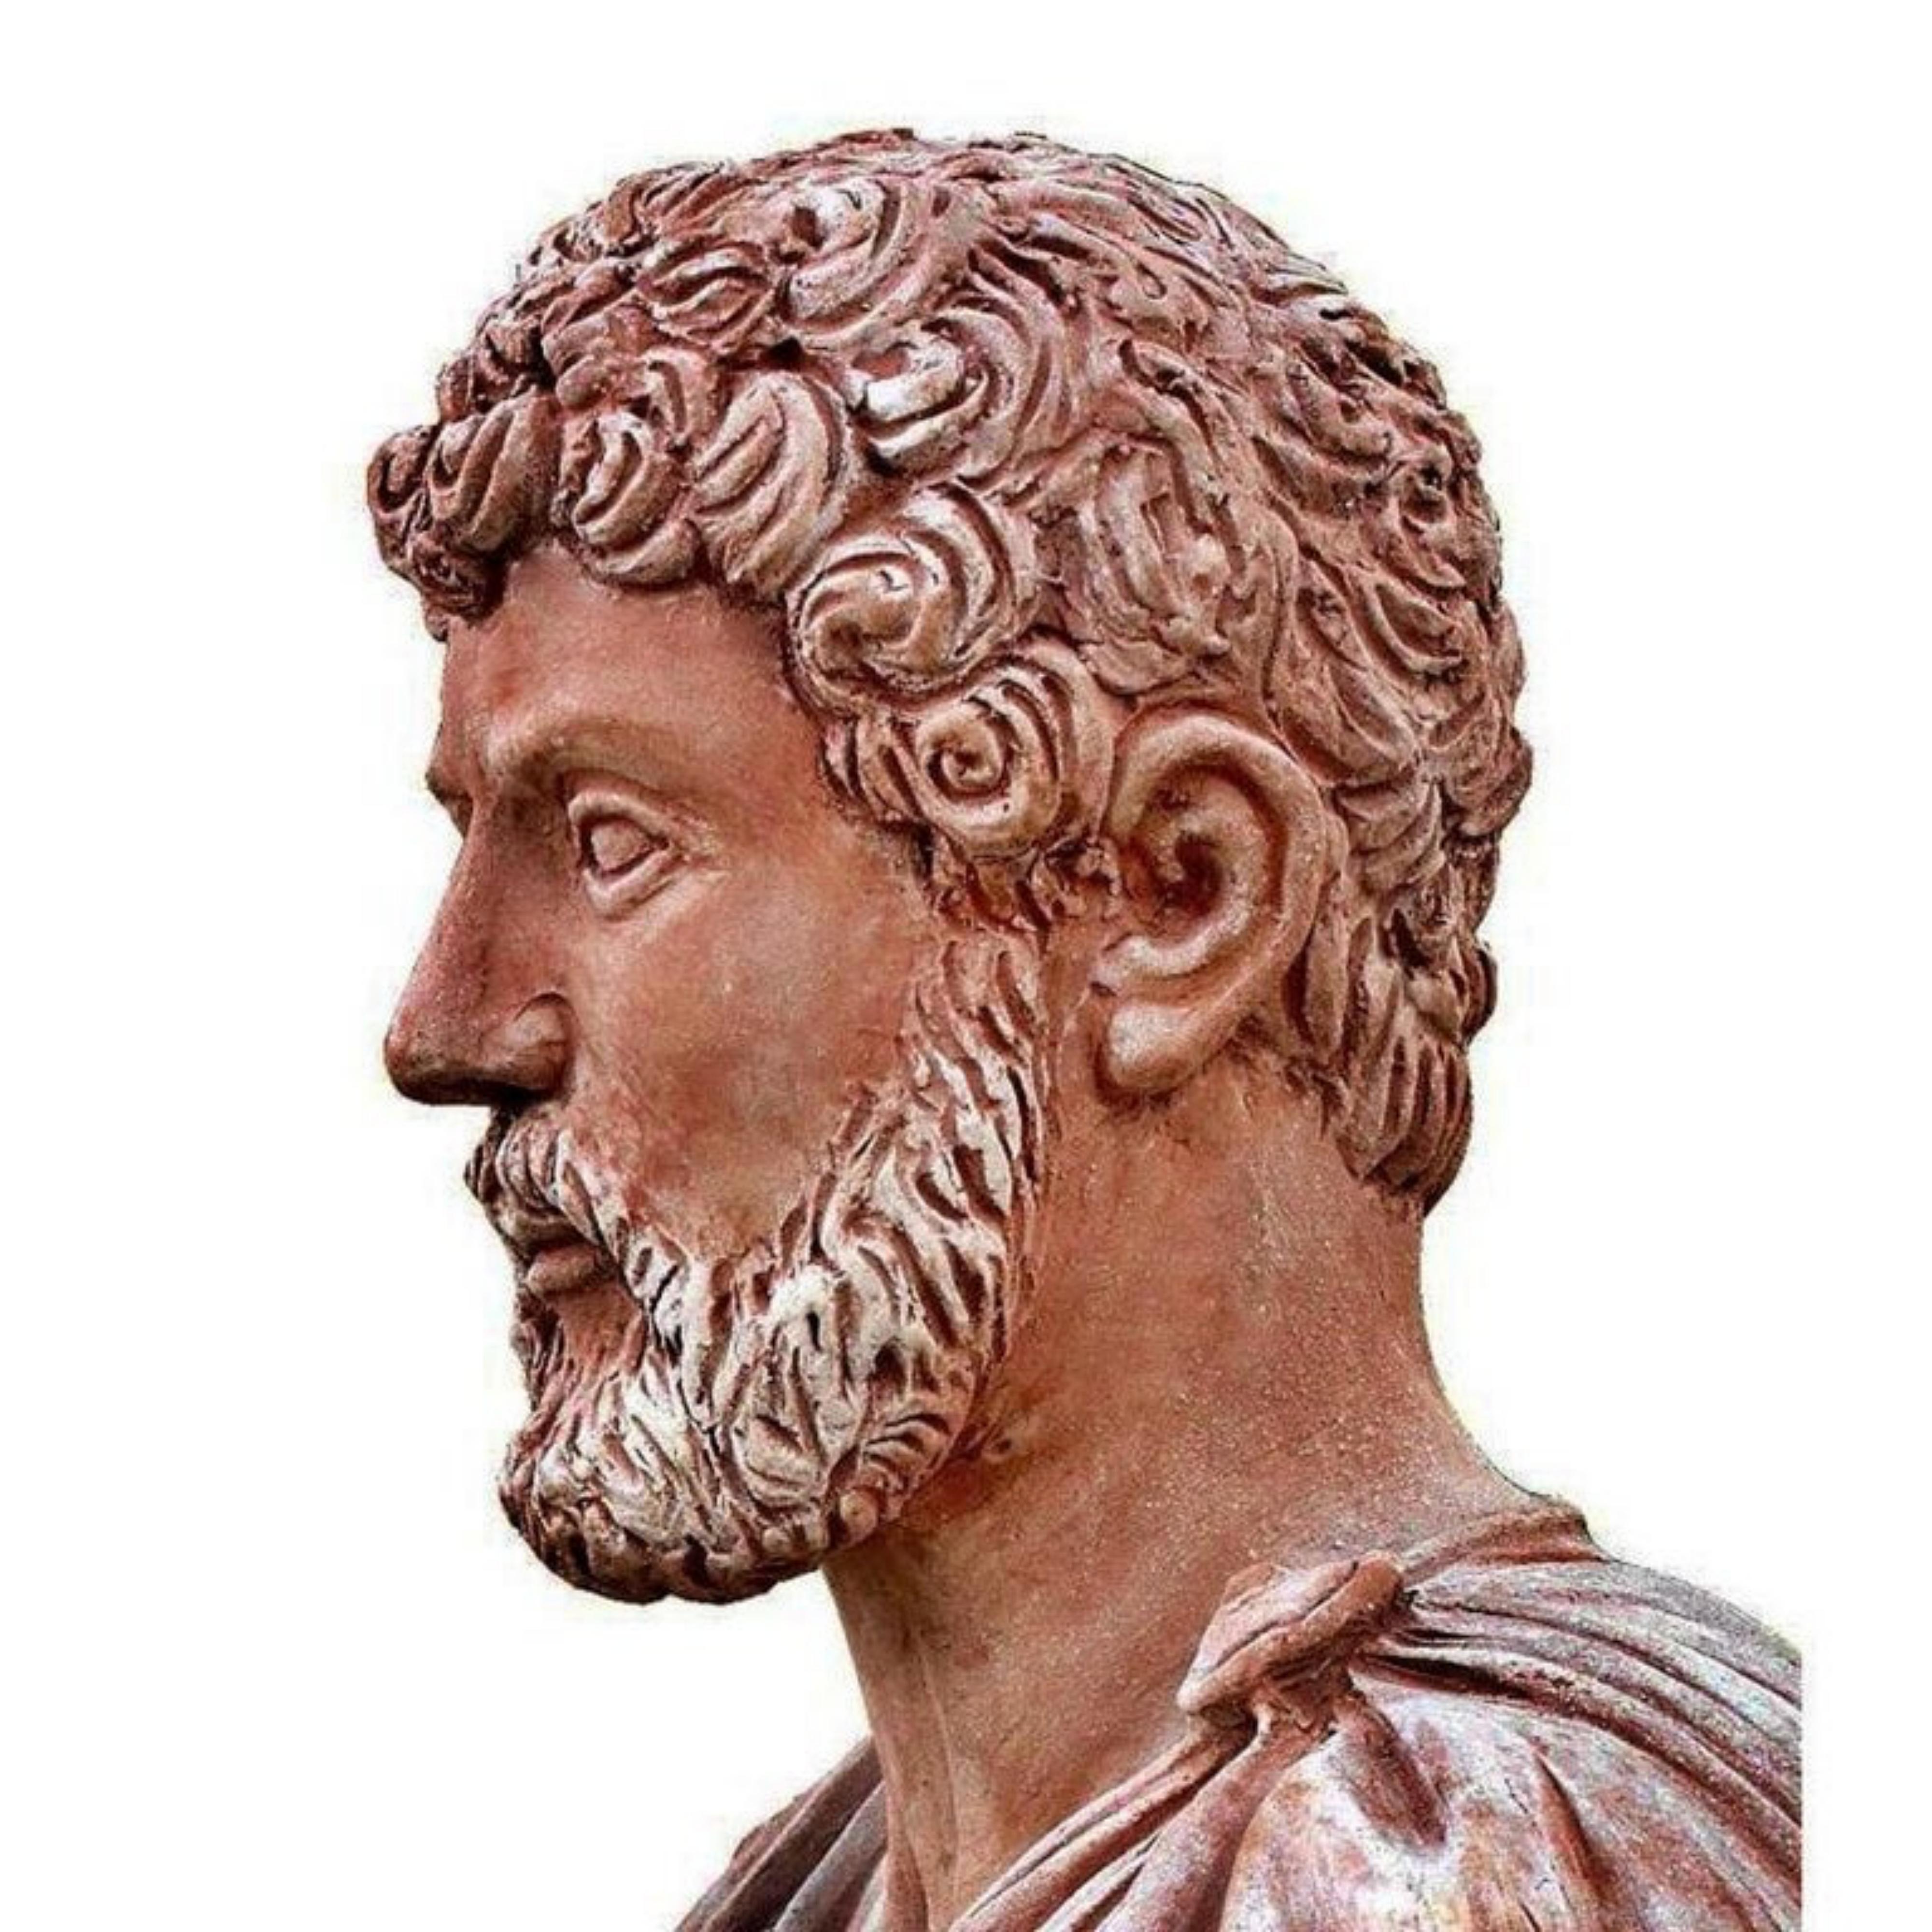 Bust In Terracotta Of Publio Elio Adriano Imperatore
began 20th century

(Italica, Seville 76 - Baia 138)
Roman emperor (117-138)
Bust in patinated terracotta in a workmanlike manner.

Academic copy of the famous bust of the Capitoline Museums in